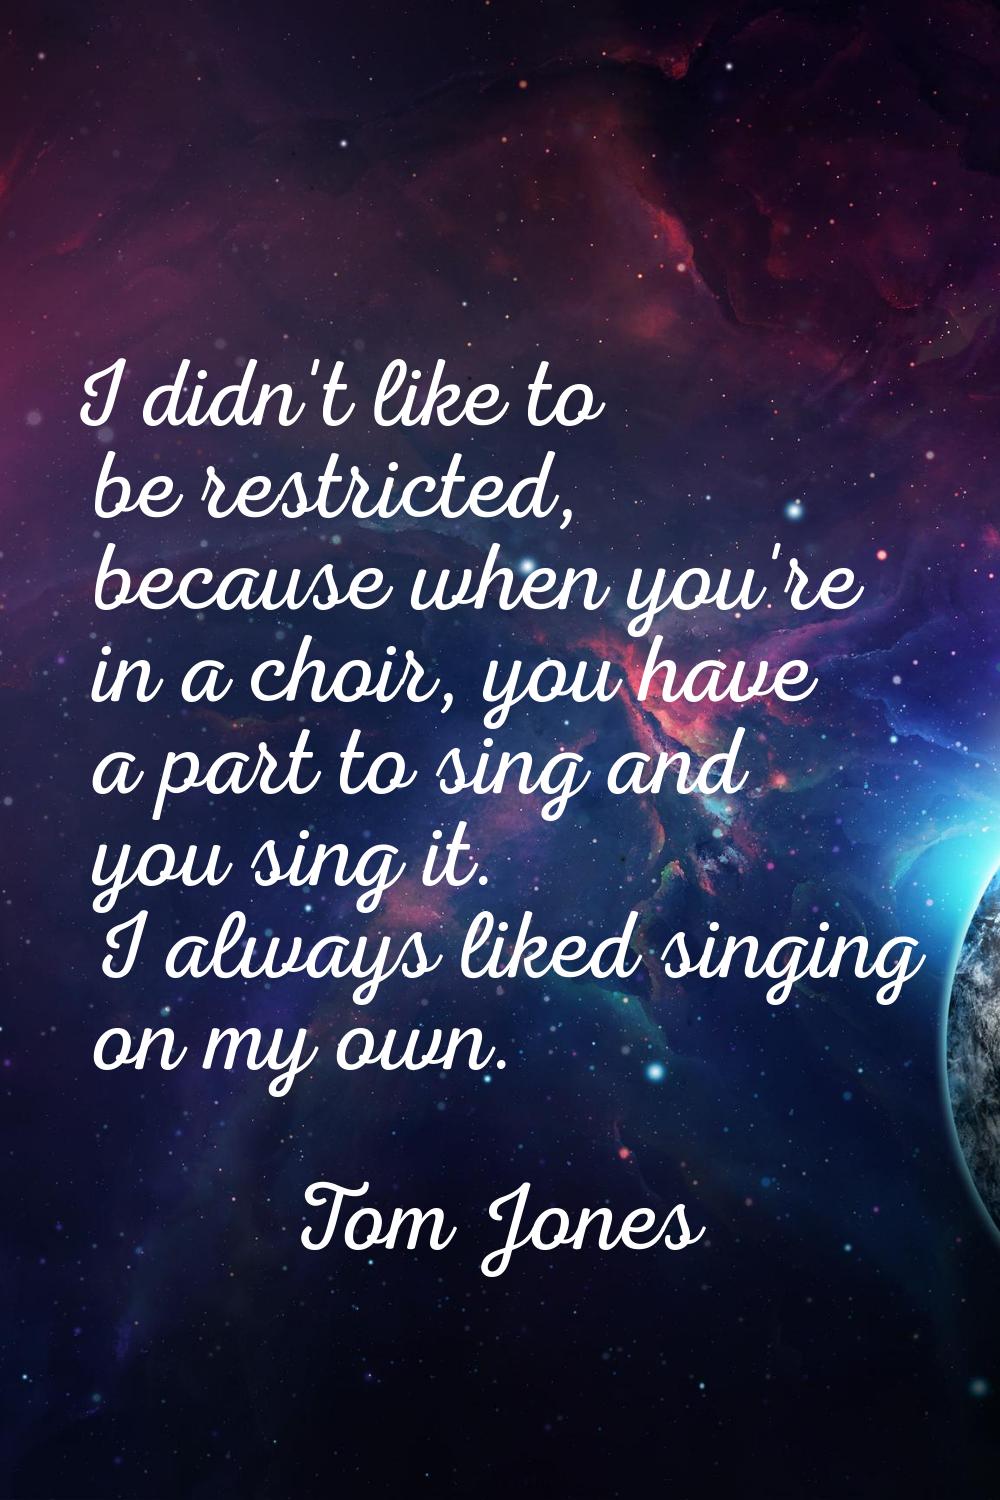 I didn't like to be restricted, because when you're in a choir, you have a part to sing and you sin